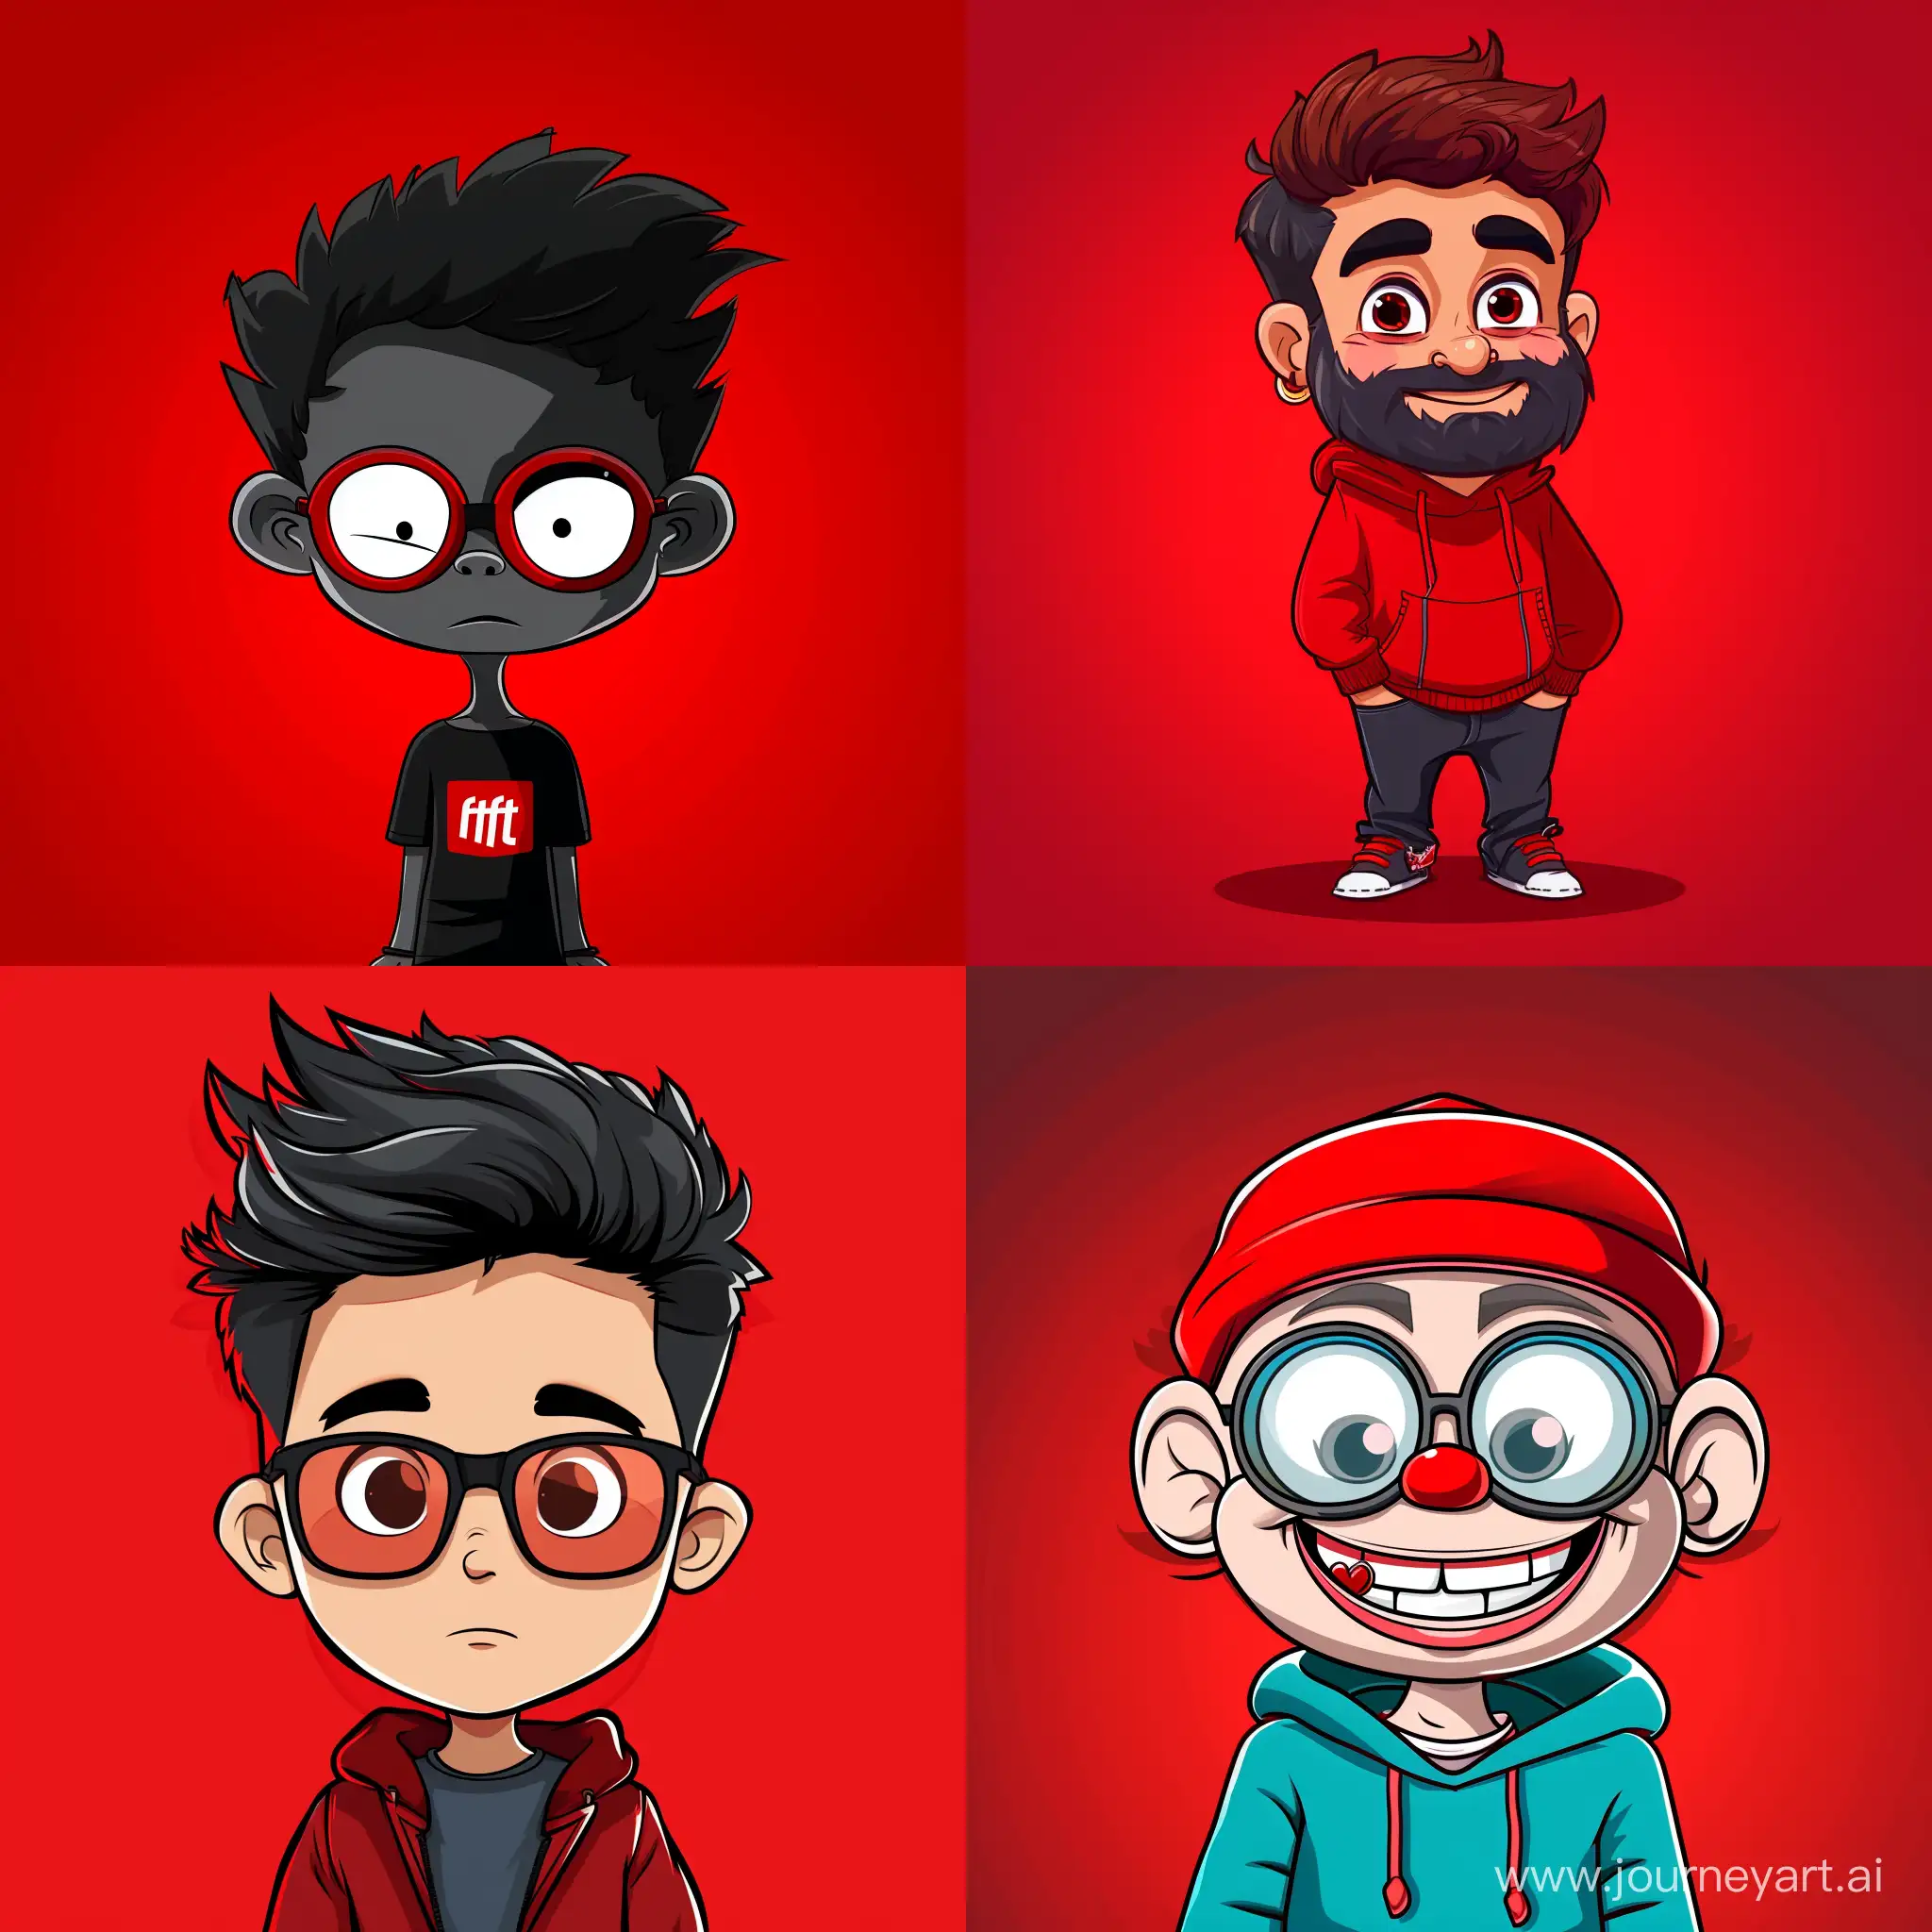 Vibrant-Reddit-Cartoon-Character-on-Red-Background